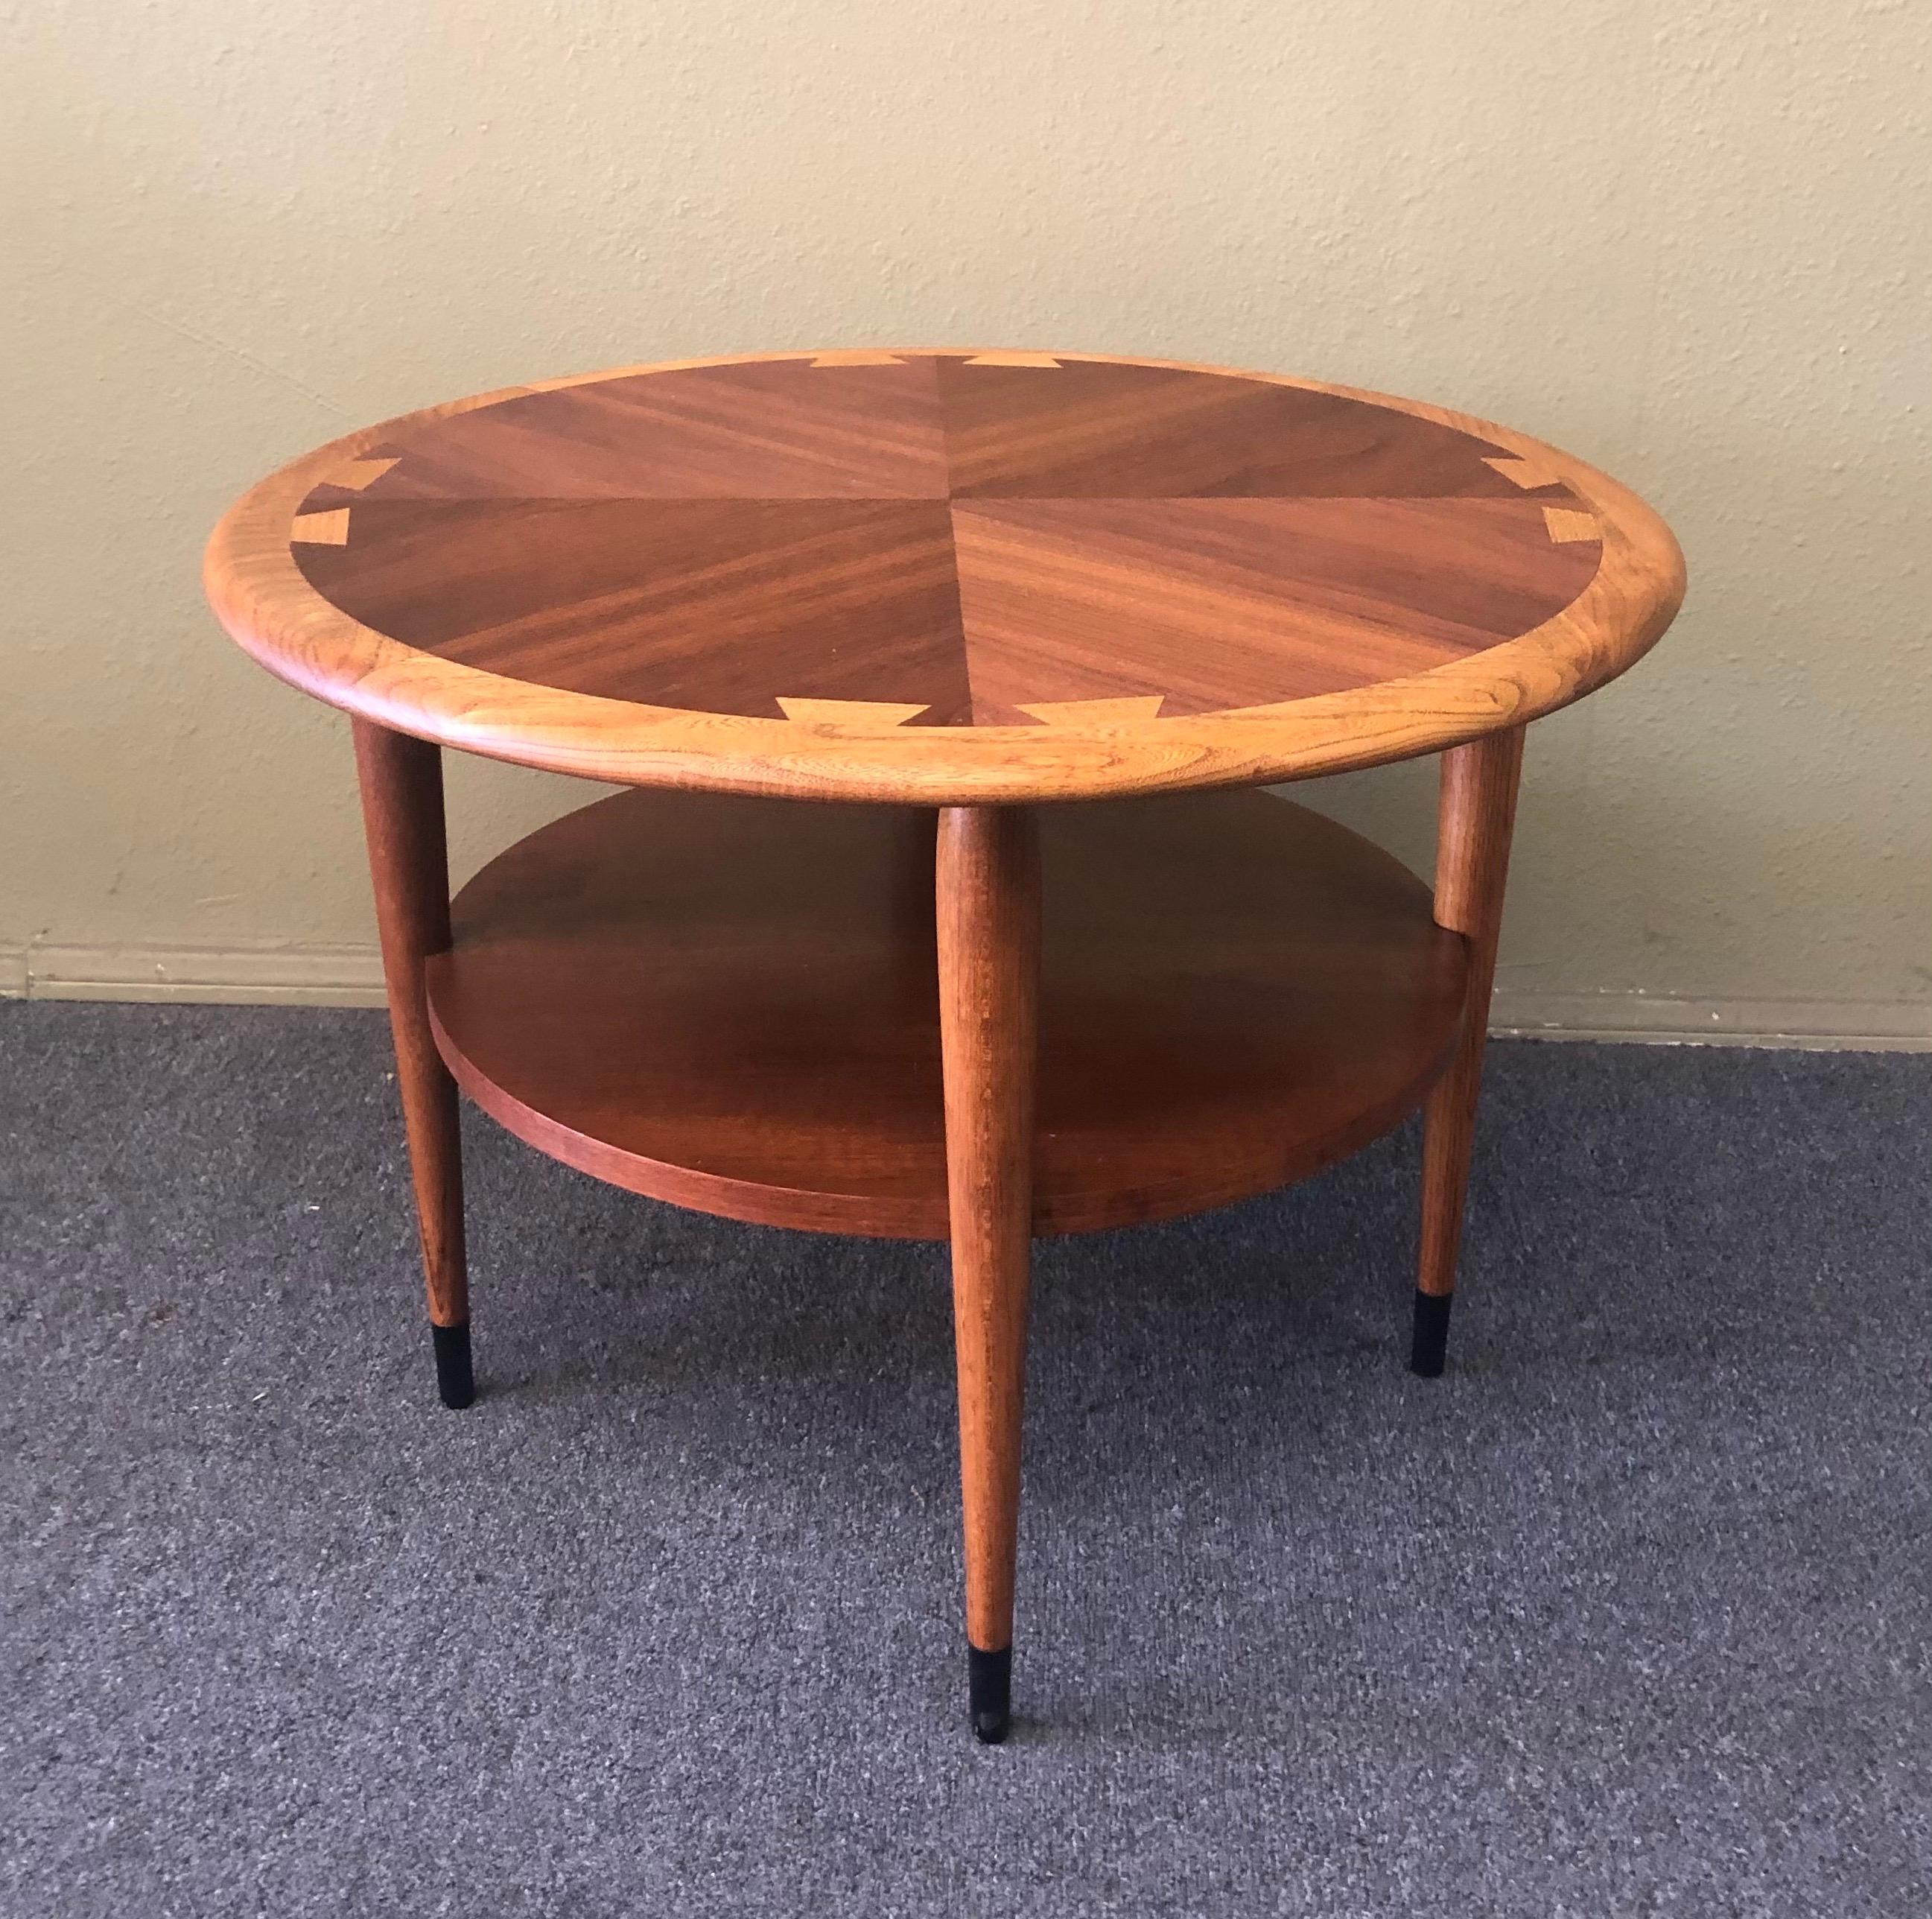 American modern walnut small coffee or side table from the 